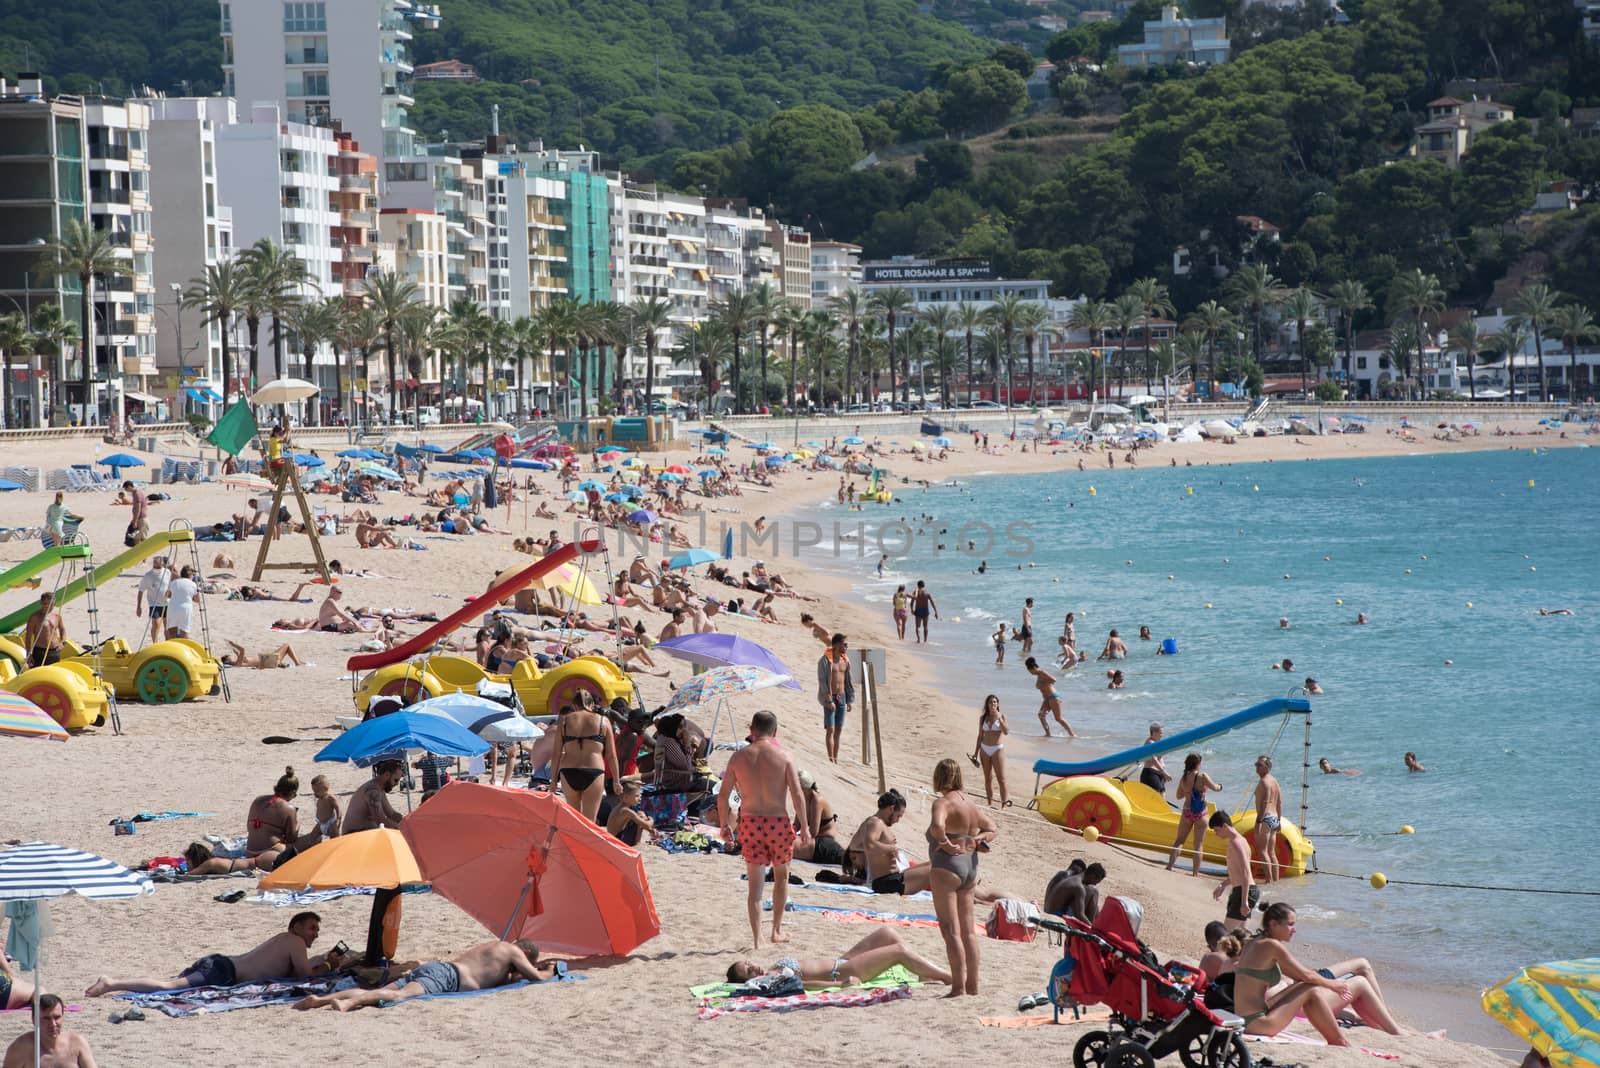 Lloret de Mar, Spain : 2020 2 Sept : People in the beach of Lloret de Mar after Covid 19 without international tourists in summer 2020